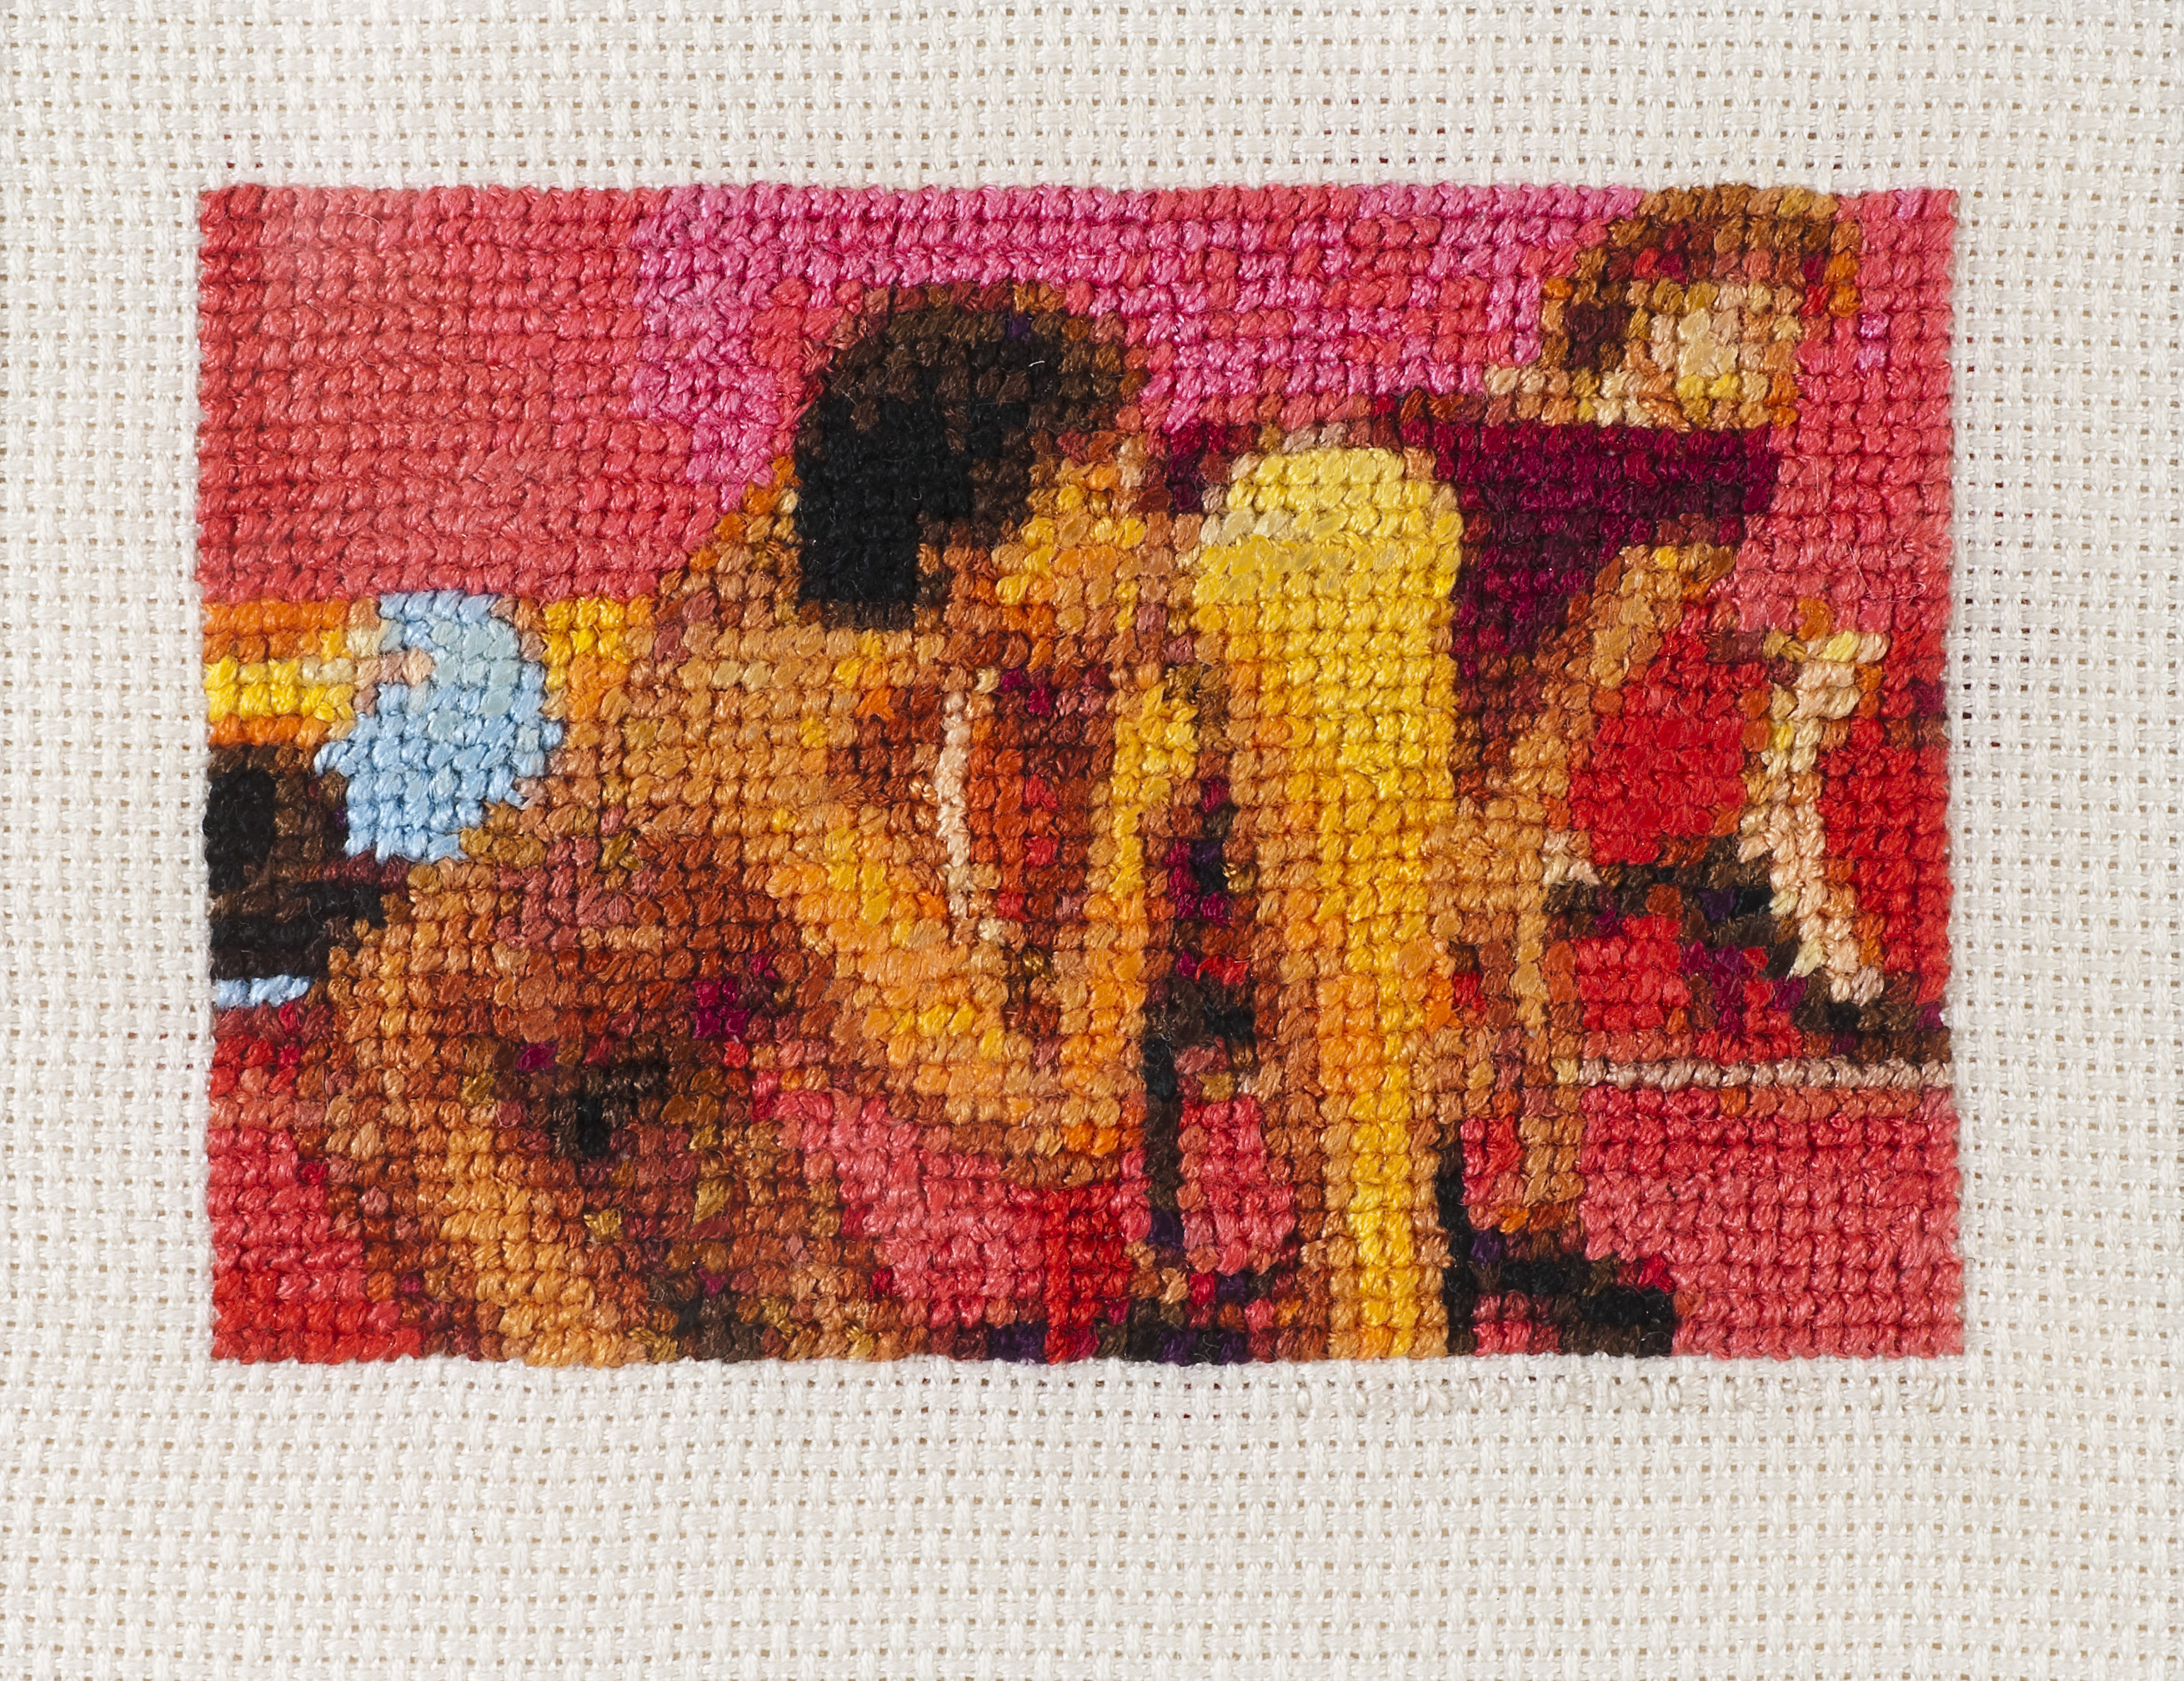 Artist Leah Emery Cross-Stitches Scenes From Vintage Pornography HuffPost Entertainment